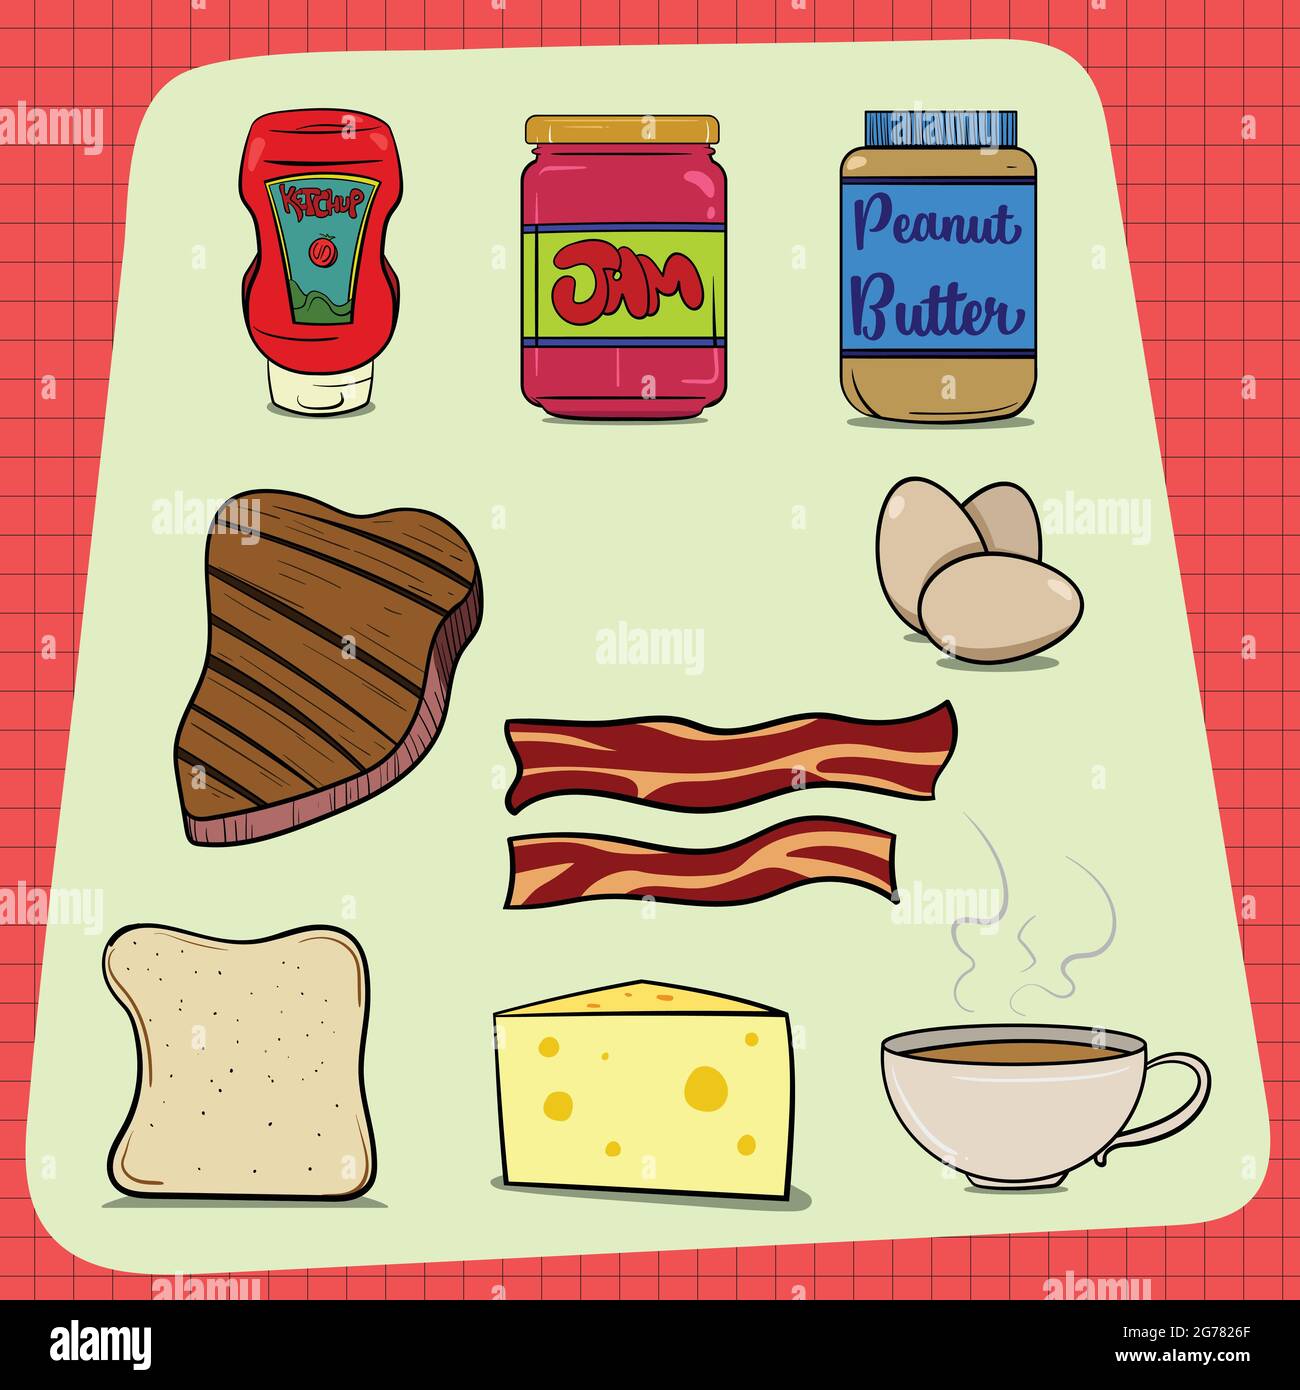 Big set of common food items found in every house. Ketchup Jam Peanut Butter Steak Eggs Bacon Bread Cheese Coffee. Red Background with check pattern. Stock Vector